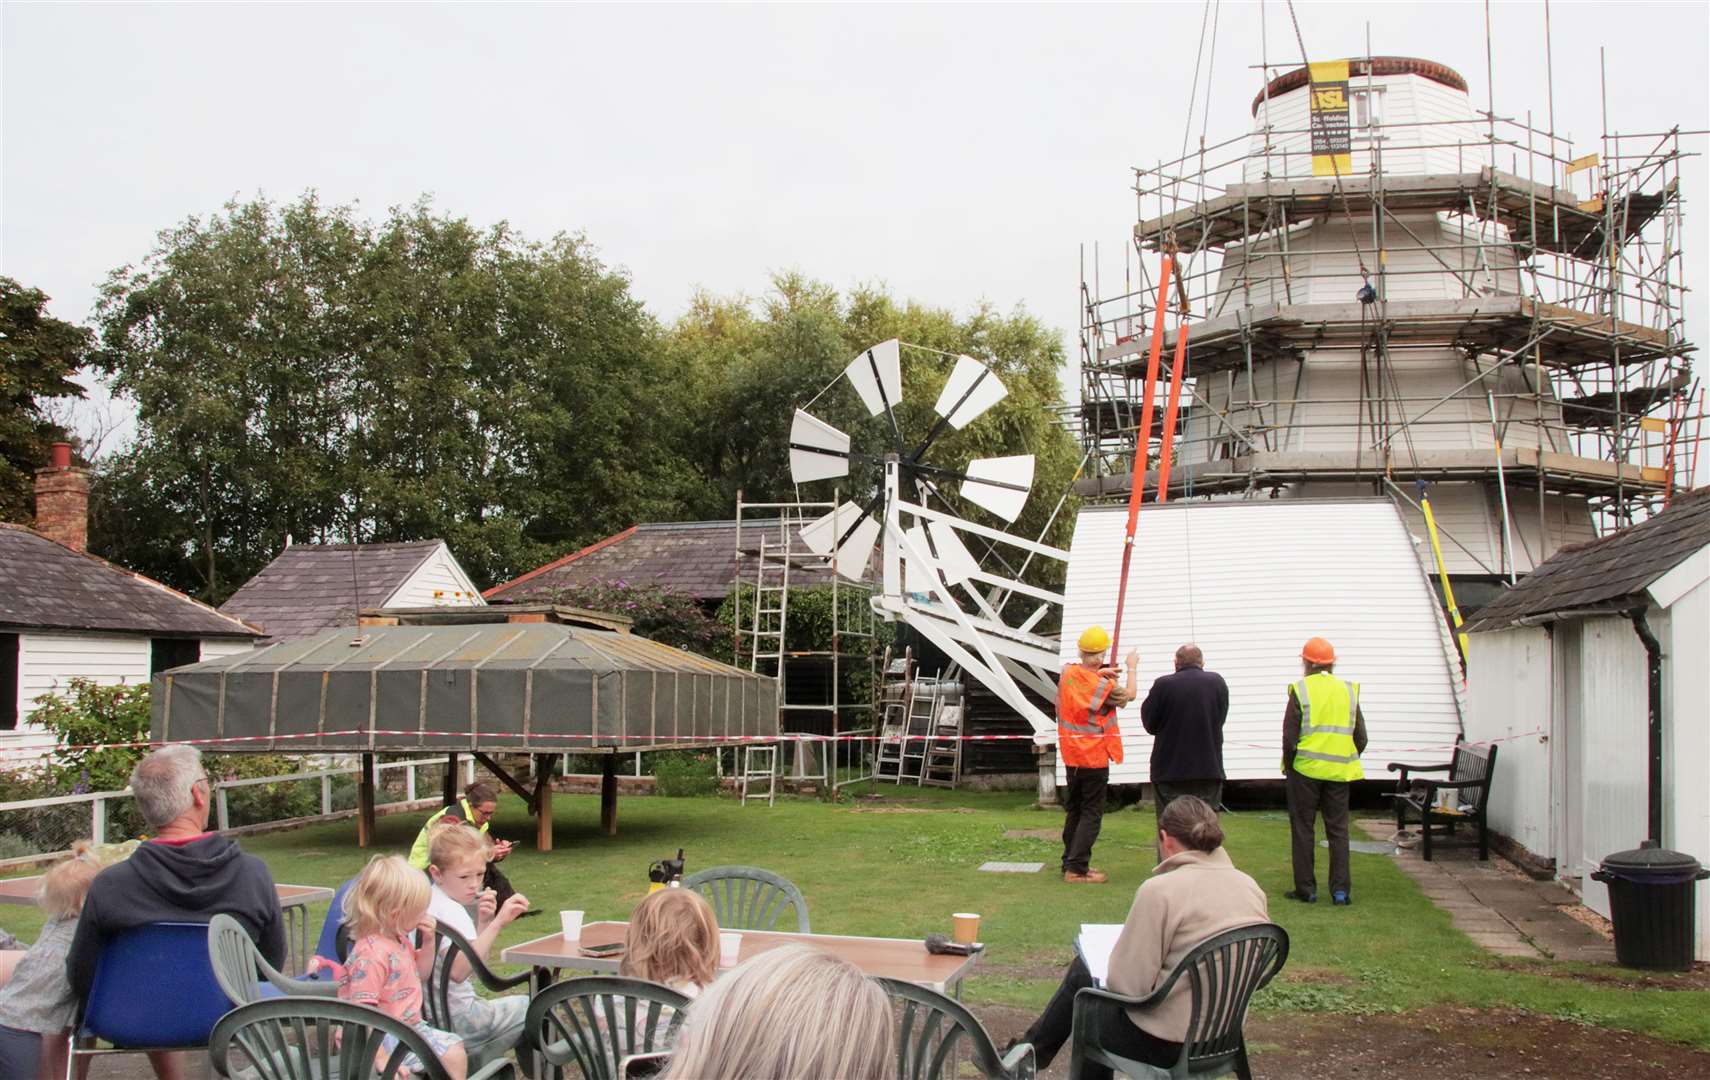 Volunteers watched as the restored cap was hoisted back into place. Picture: The White Mill Rural Heritage Centre